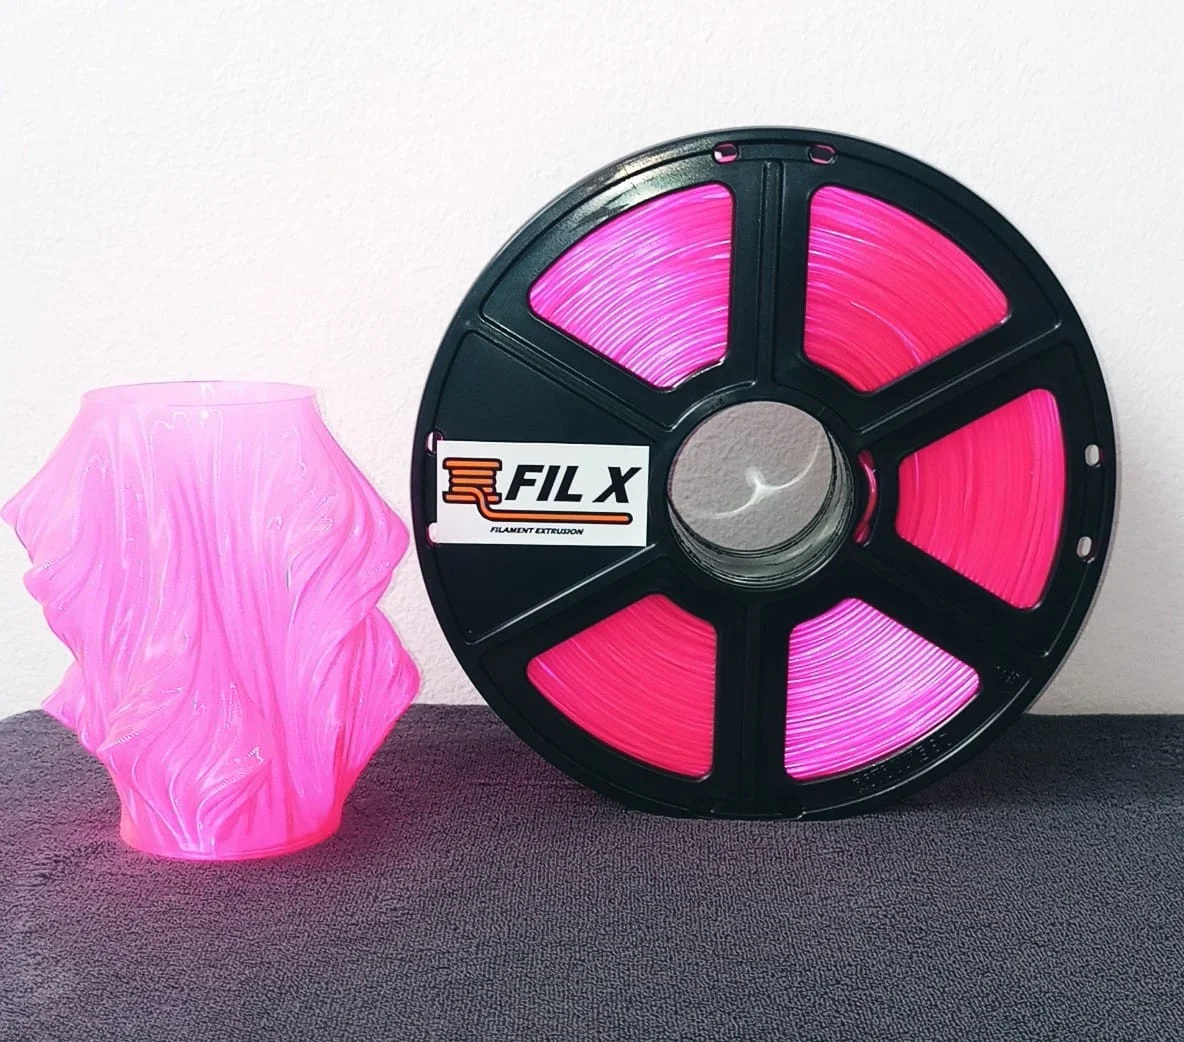 Fil X -Neon Pink -SBS 1.75mm-1kg-SKU-FILNPNKBS175 -dboy3d.co.za-filament-and-printers.Order Online Fil X Filament Neon Pink SBS 3D Printing specialist and filament supplier in South Africa. Nationwide Delivery. DBoy3D